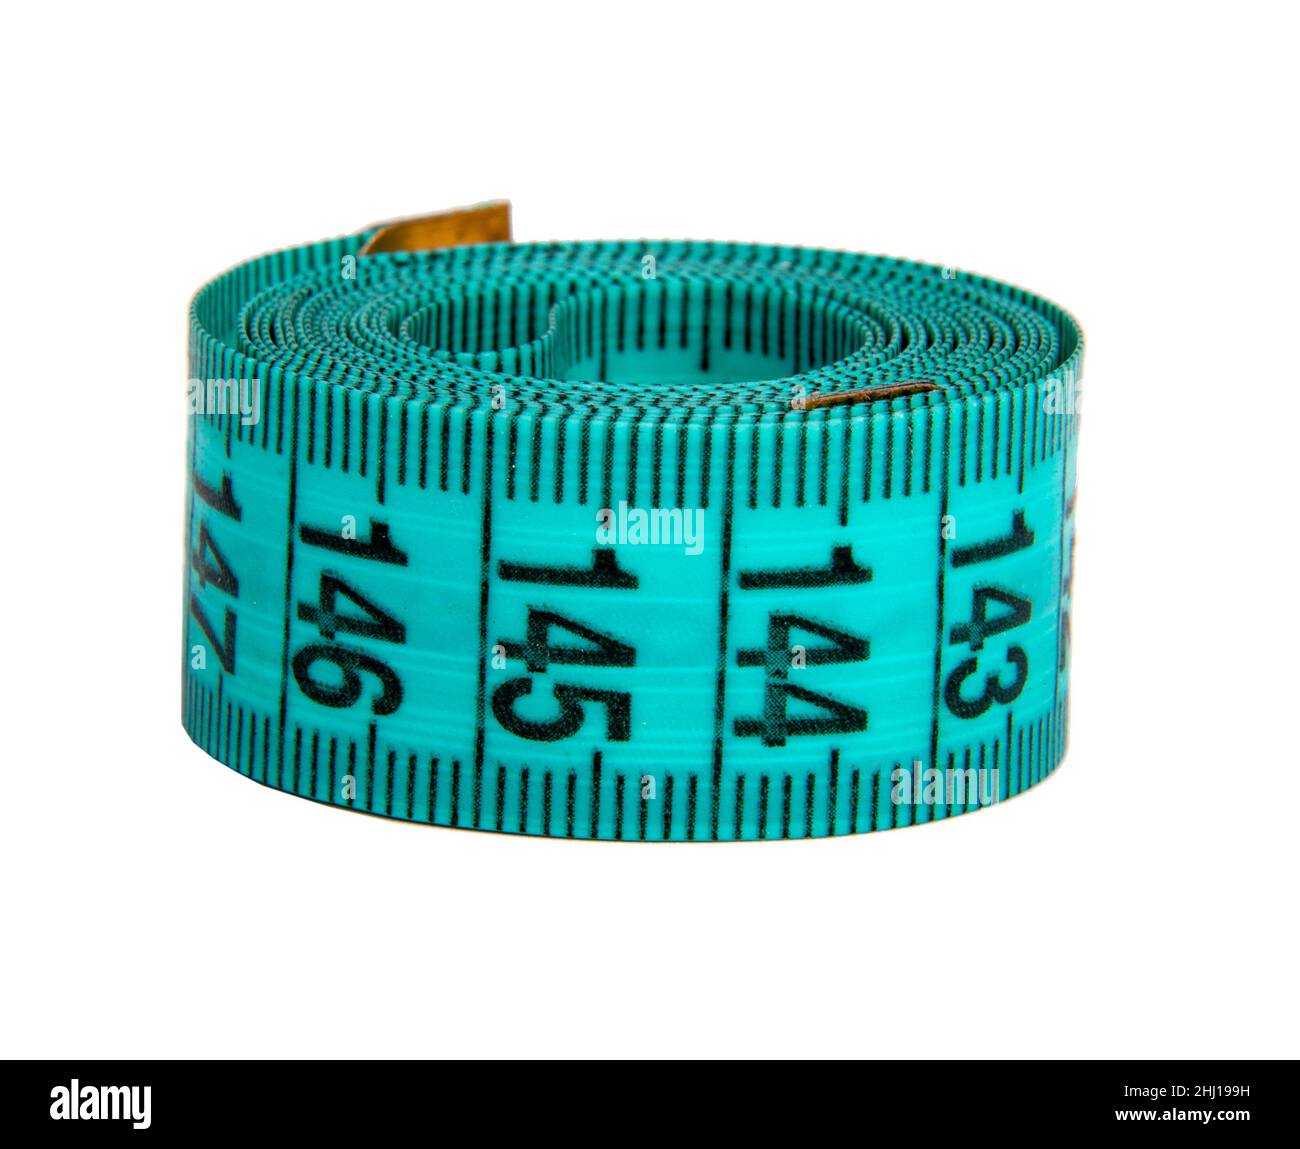 https://c8.alamy.com/comp/2HJ199H/blue-rubber-tape-measure-for-sewing-cloth-or-fabric-isolated-on-the-white-2HJ199H.jpg